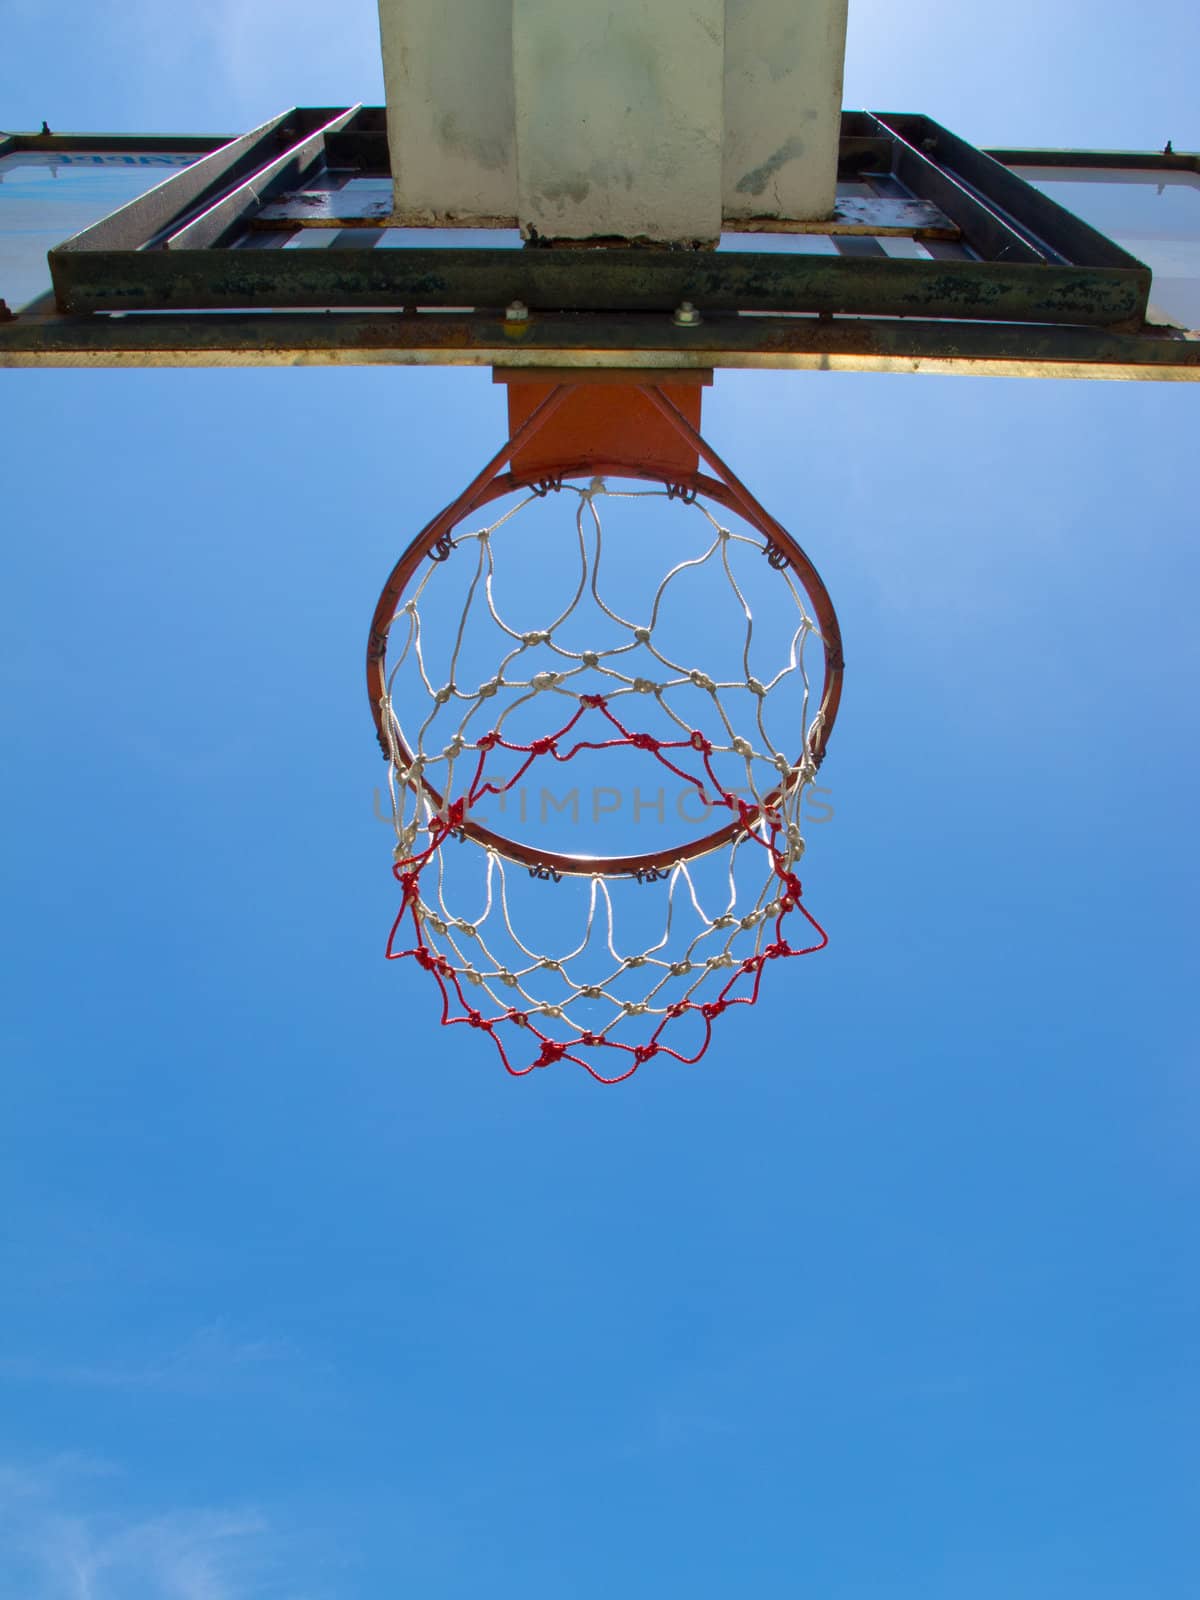 a basketball's hoop in very hot day.